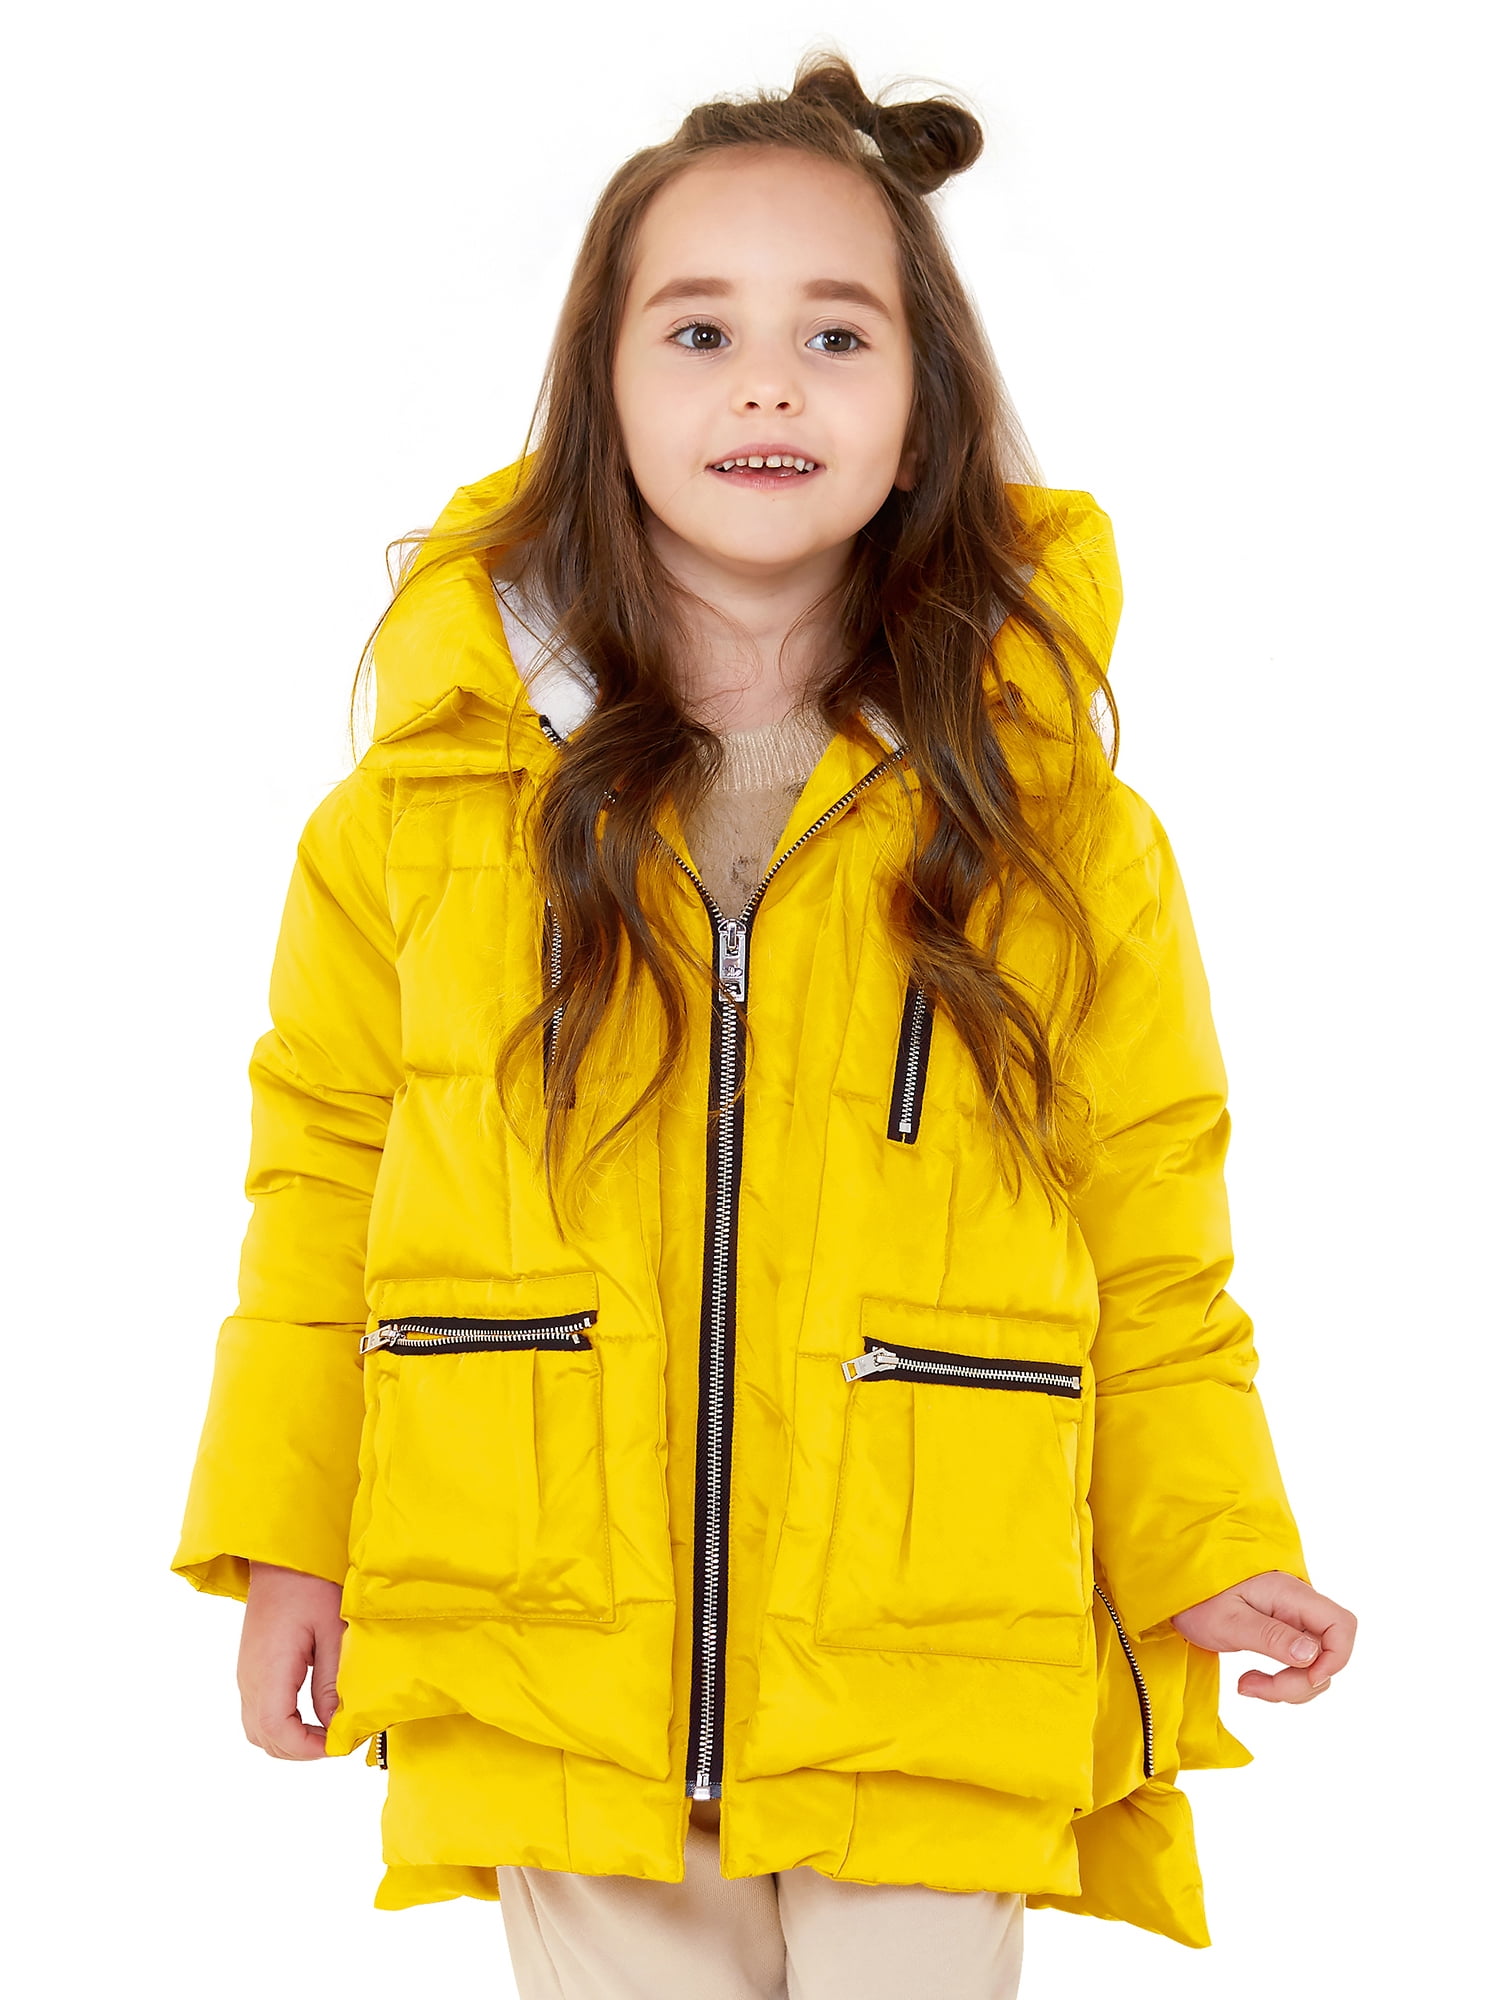 Sweatwater Girls Puffer Thick Hooded Bubble Coat Zip-Front Warm Jacket 